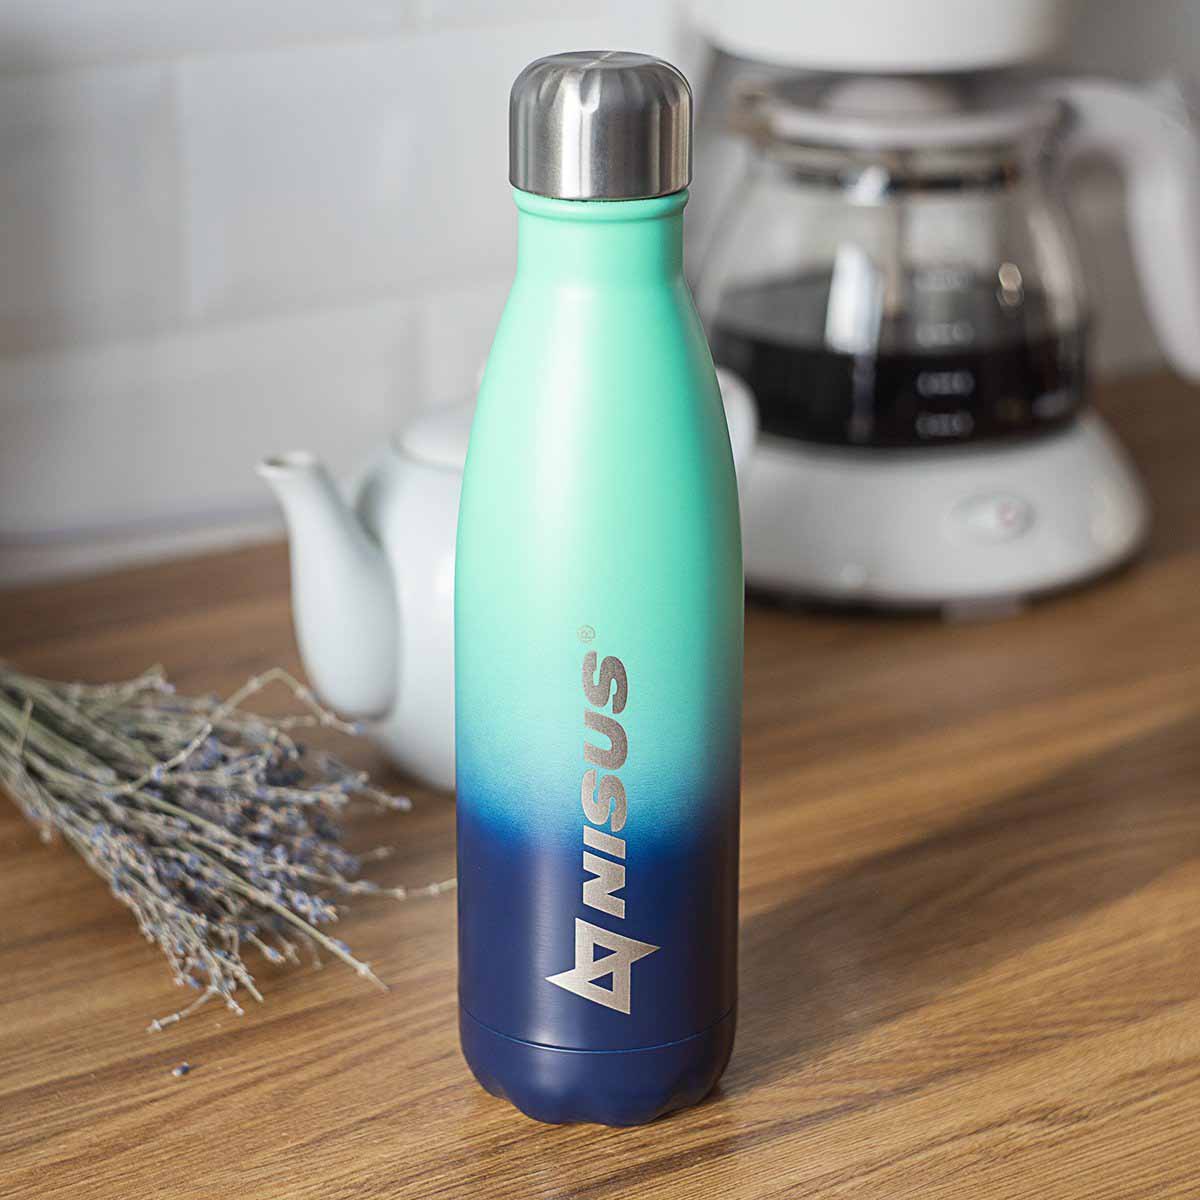 Stainless Steel Twist Top Water Bottle, Double Colored, 17 oz, Green and Black standing on the kitchen table